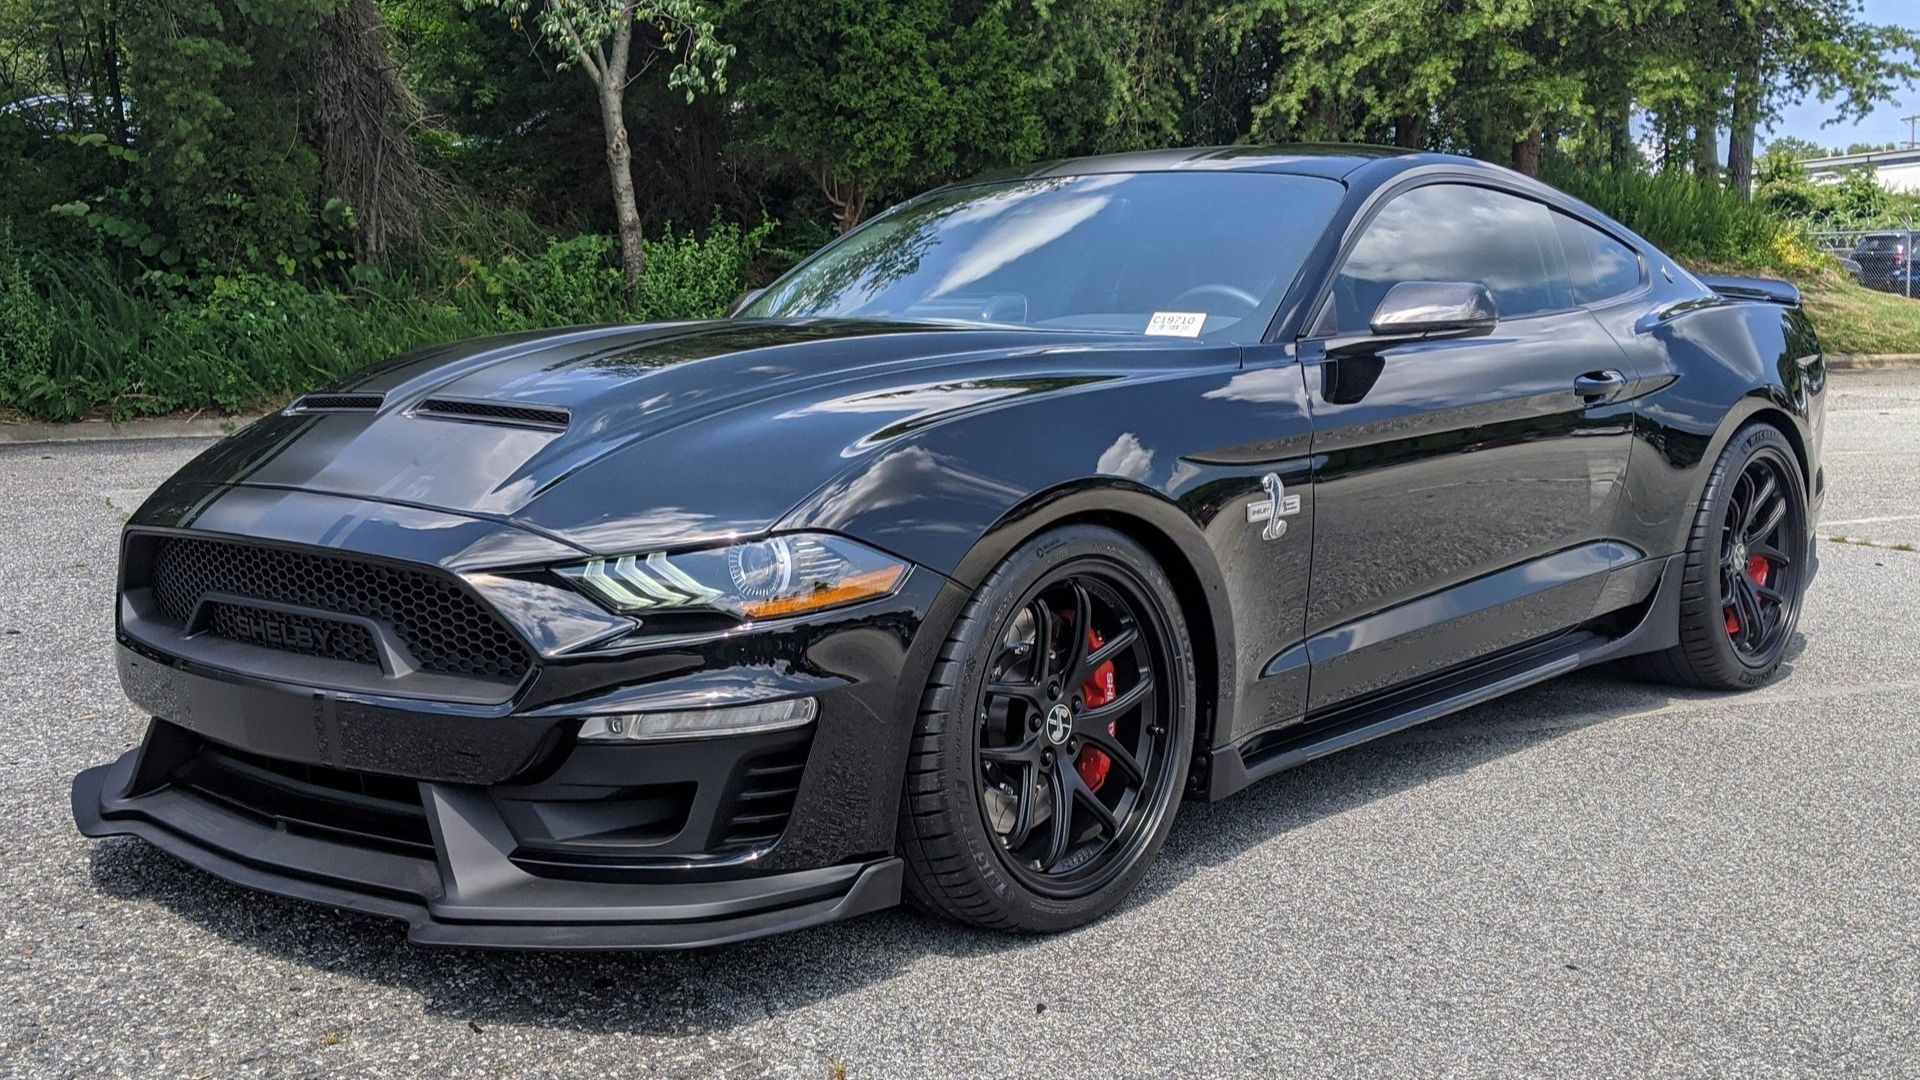 2020 Shelby Super Snake Has Just 22 Miles